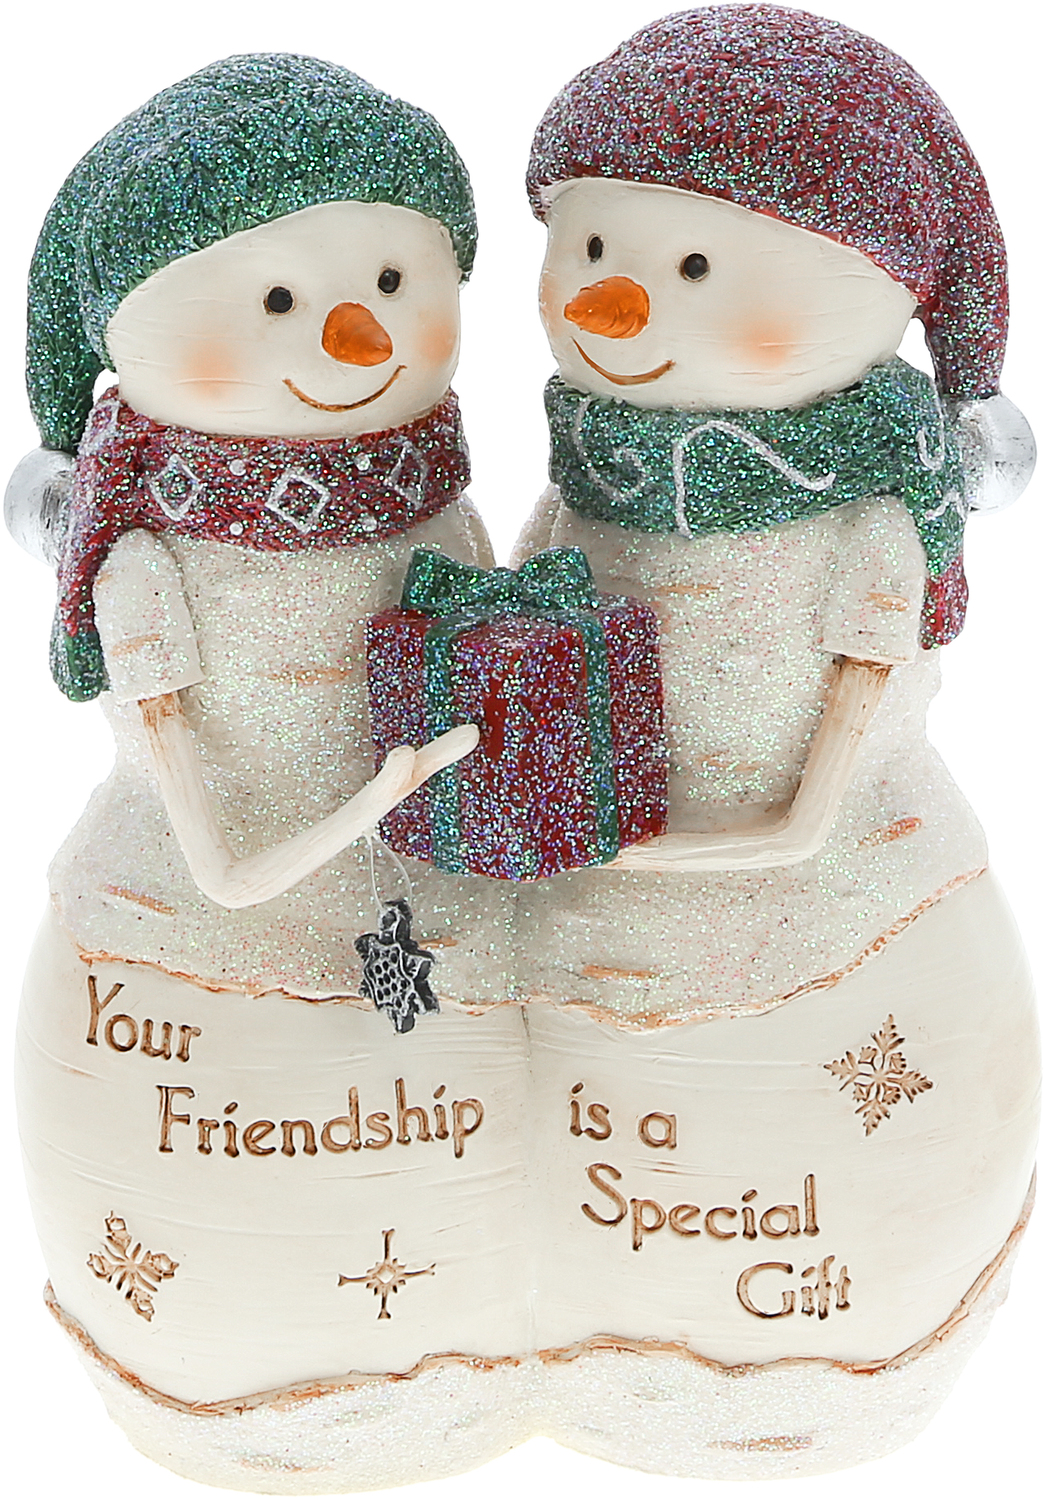 Friendship Gift by The Birchhearts - Friendship Gift - 4.5" Snowcouple Holding a Gift